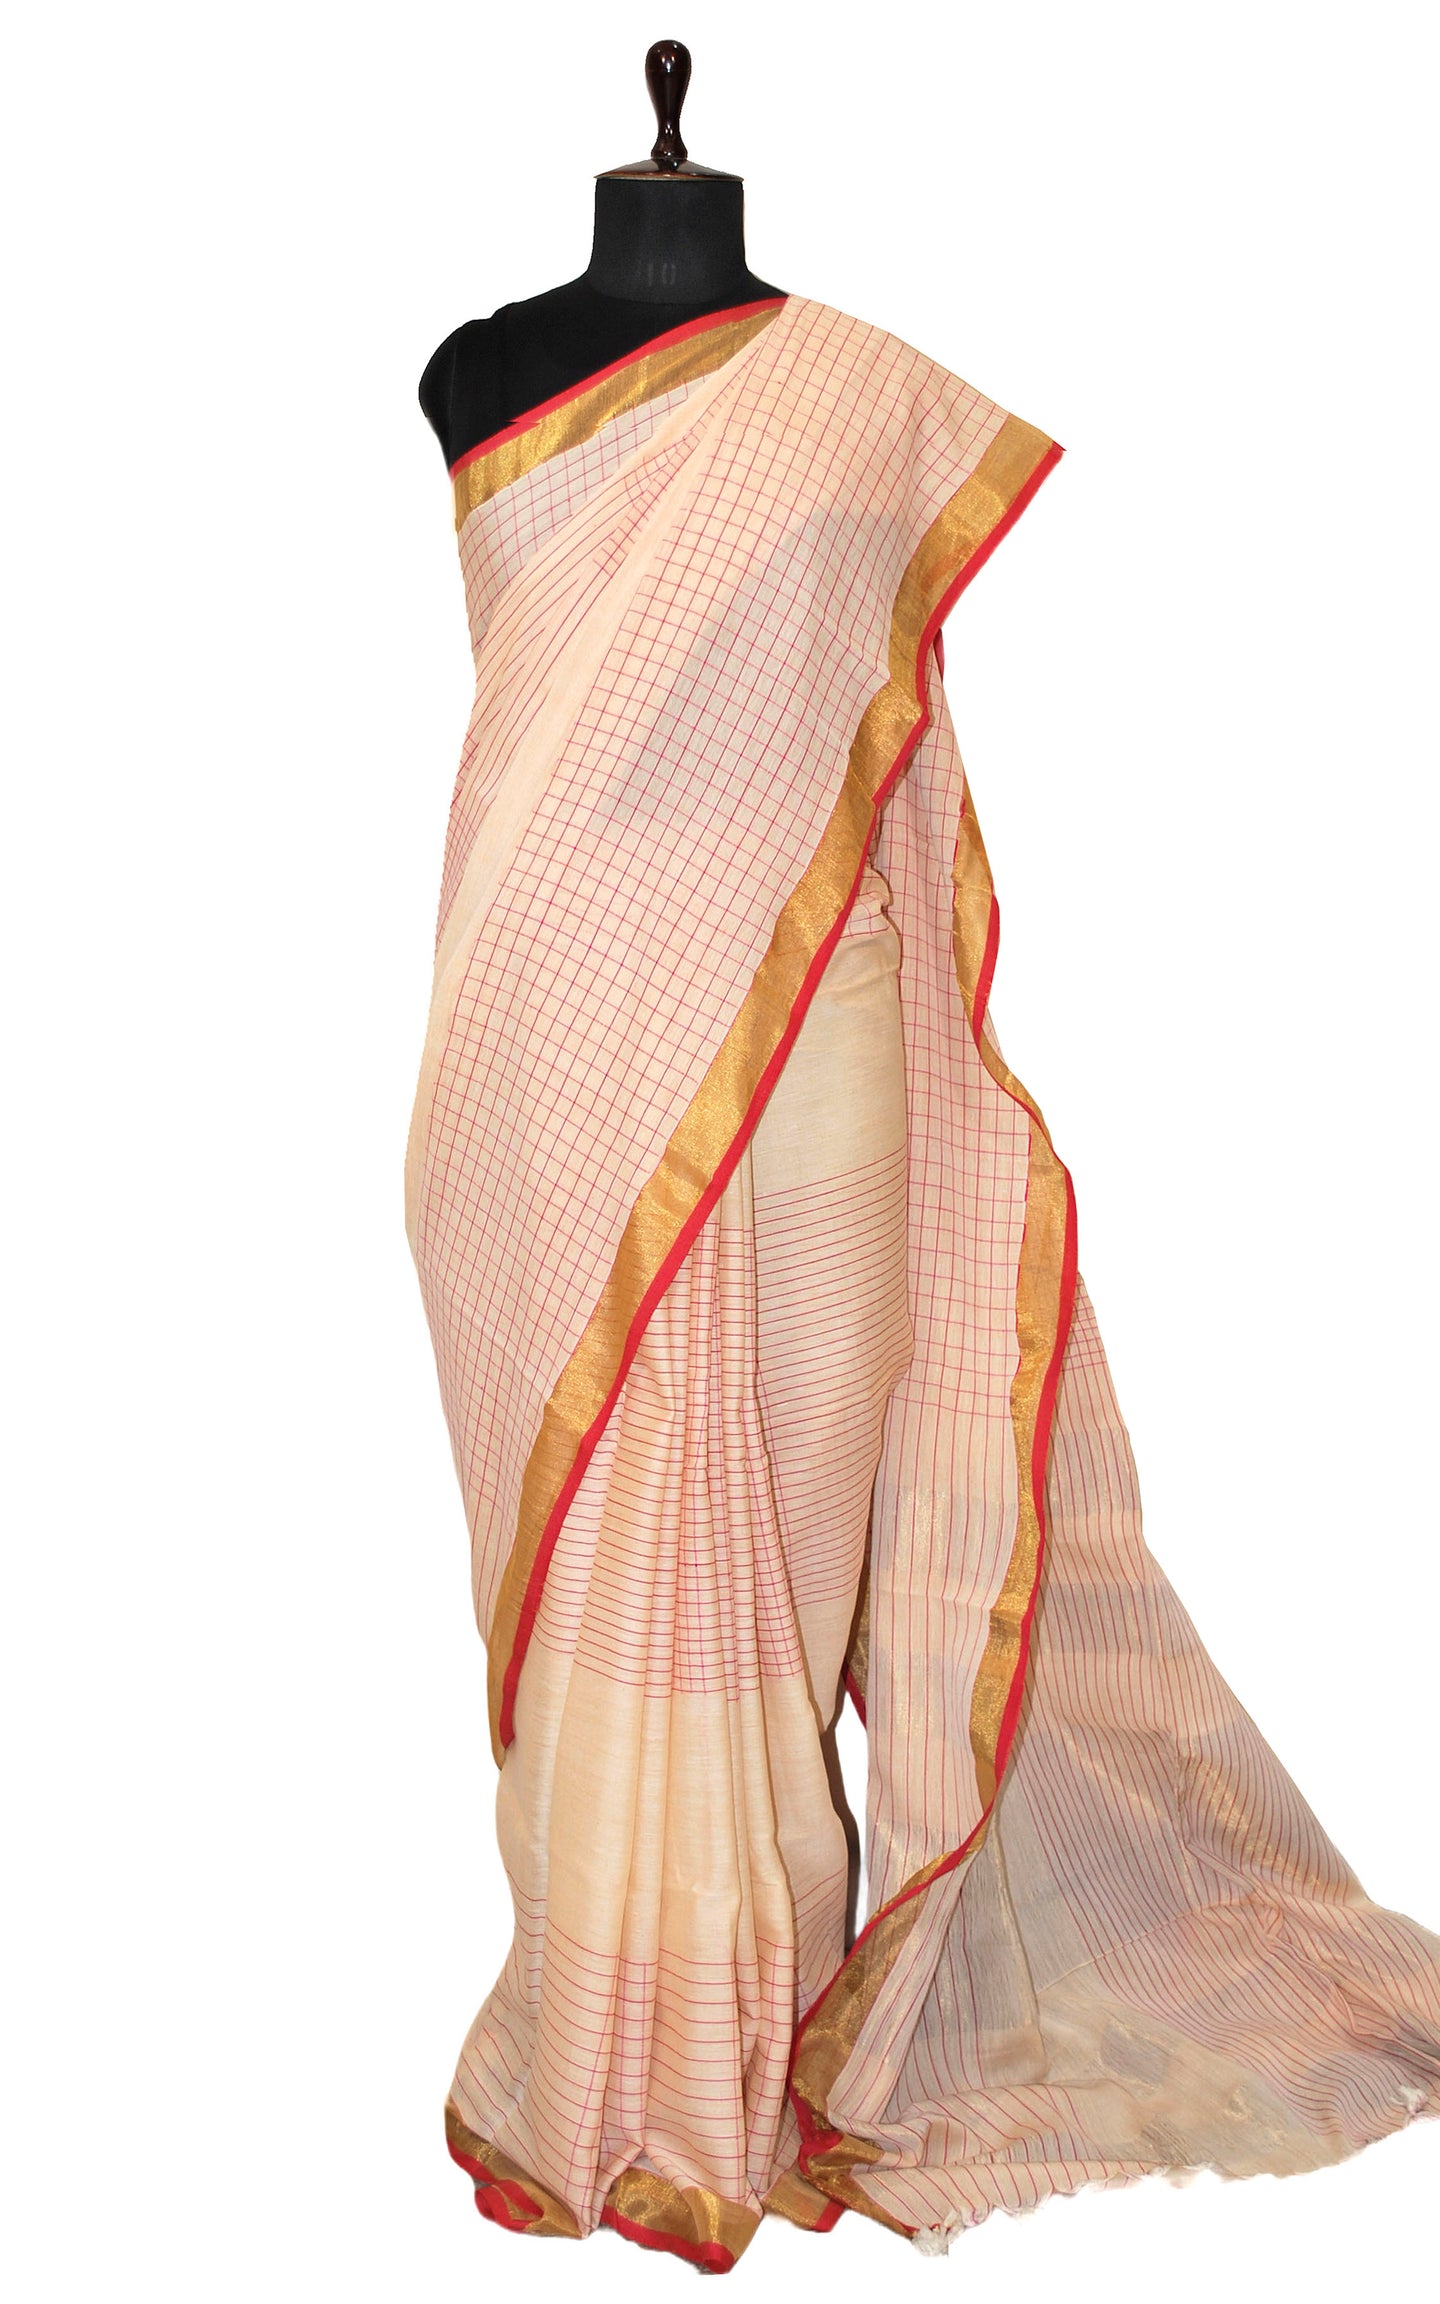 Handwoven Premium Soft Cotton Tissue Saree in Parmesan, Red and Gold